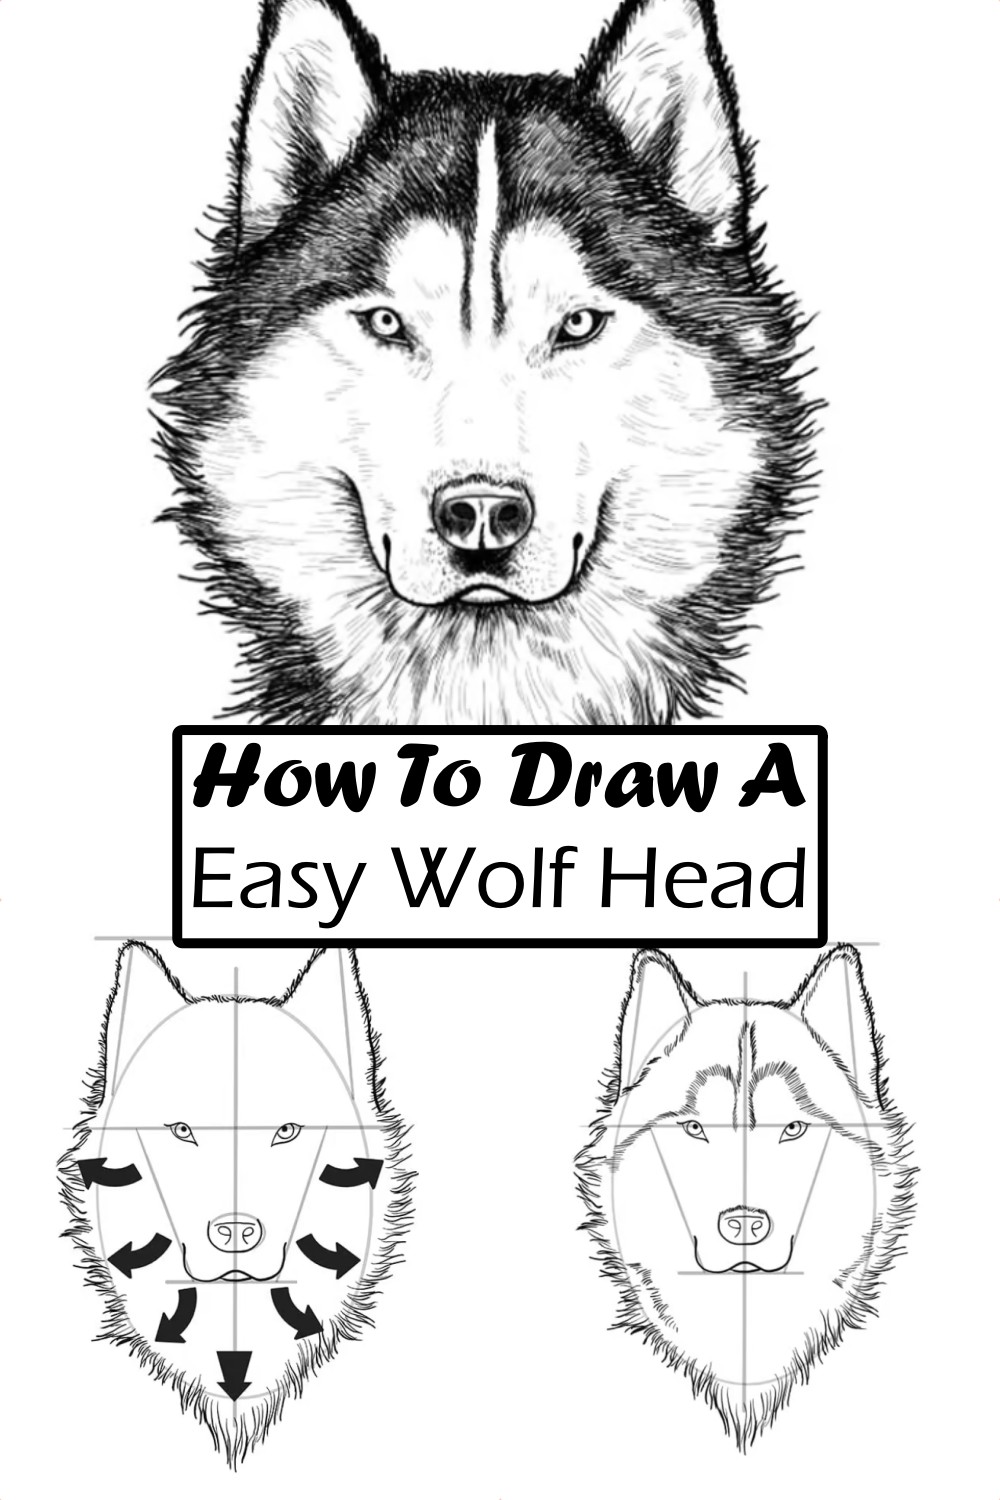 How To Draw A Easy Wolf Head